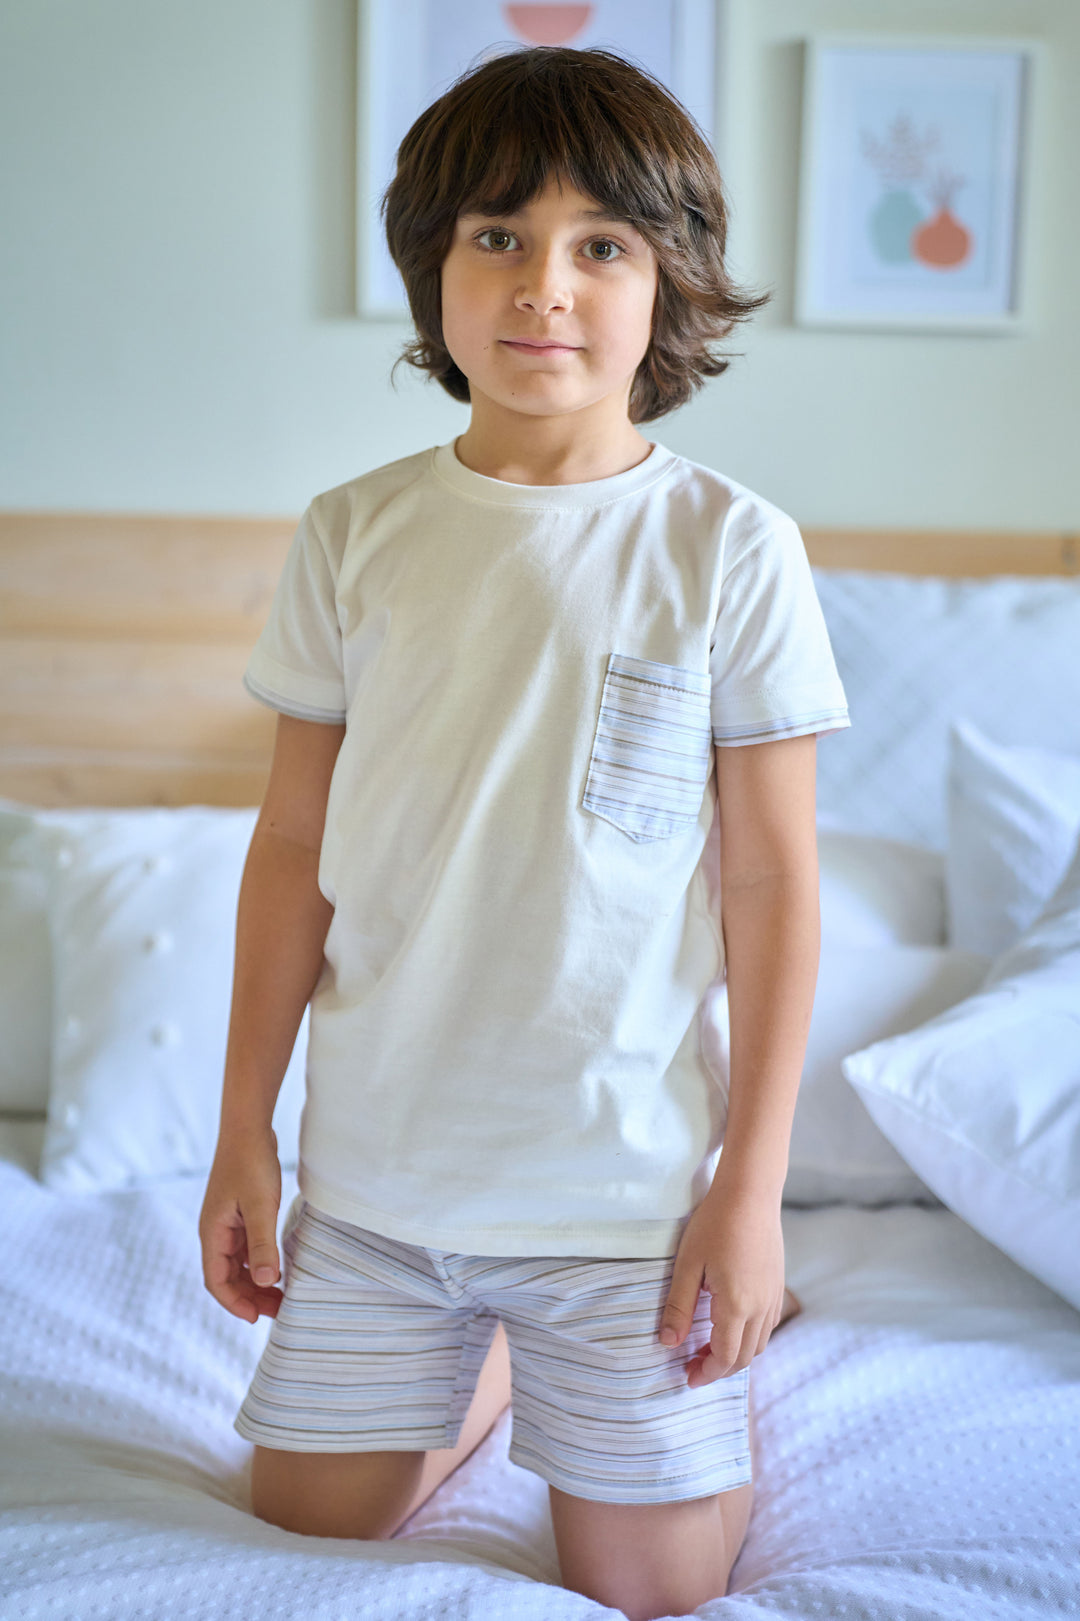 Rapife "Colby" Pale Blue & Beige Stripe T-Shirt & Shorts | Millie and John